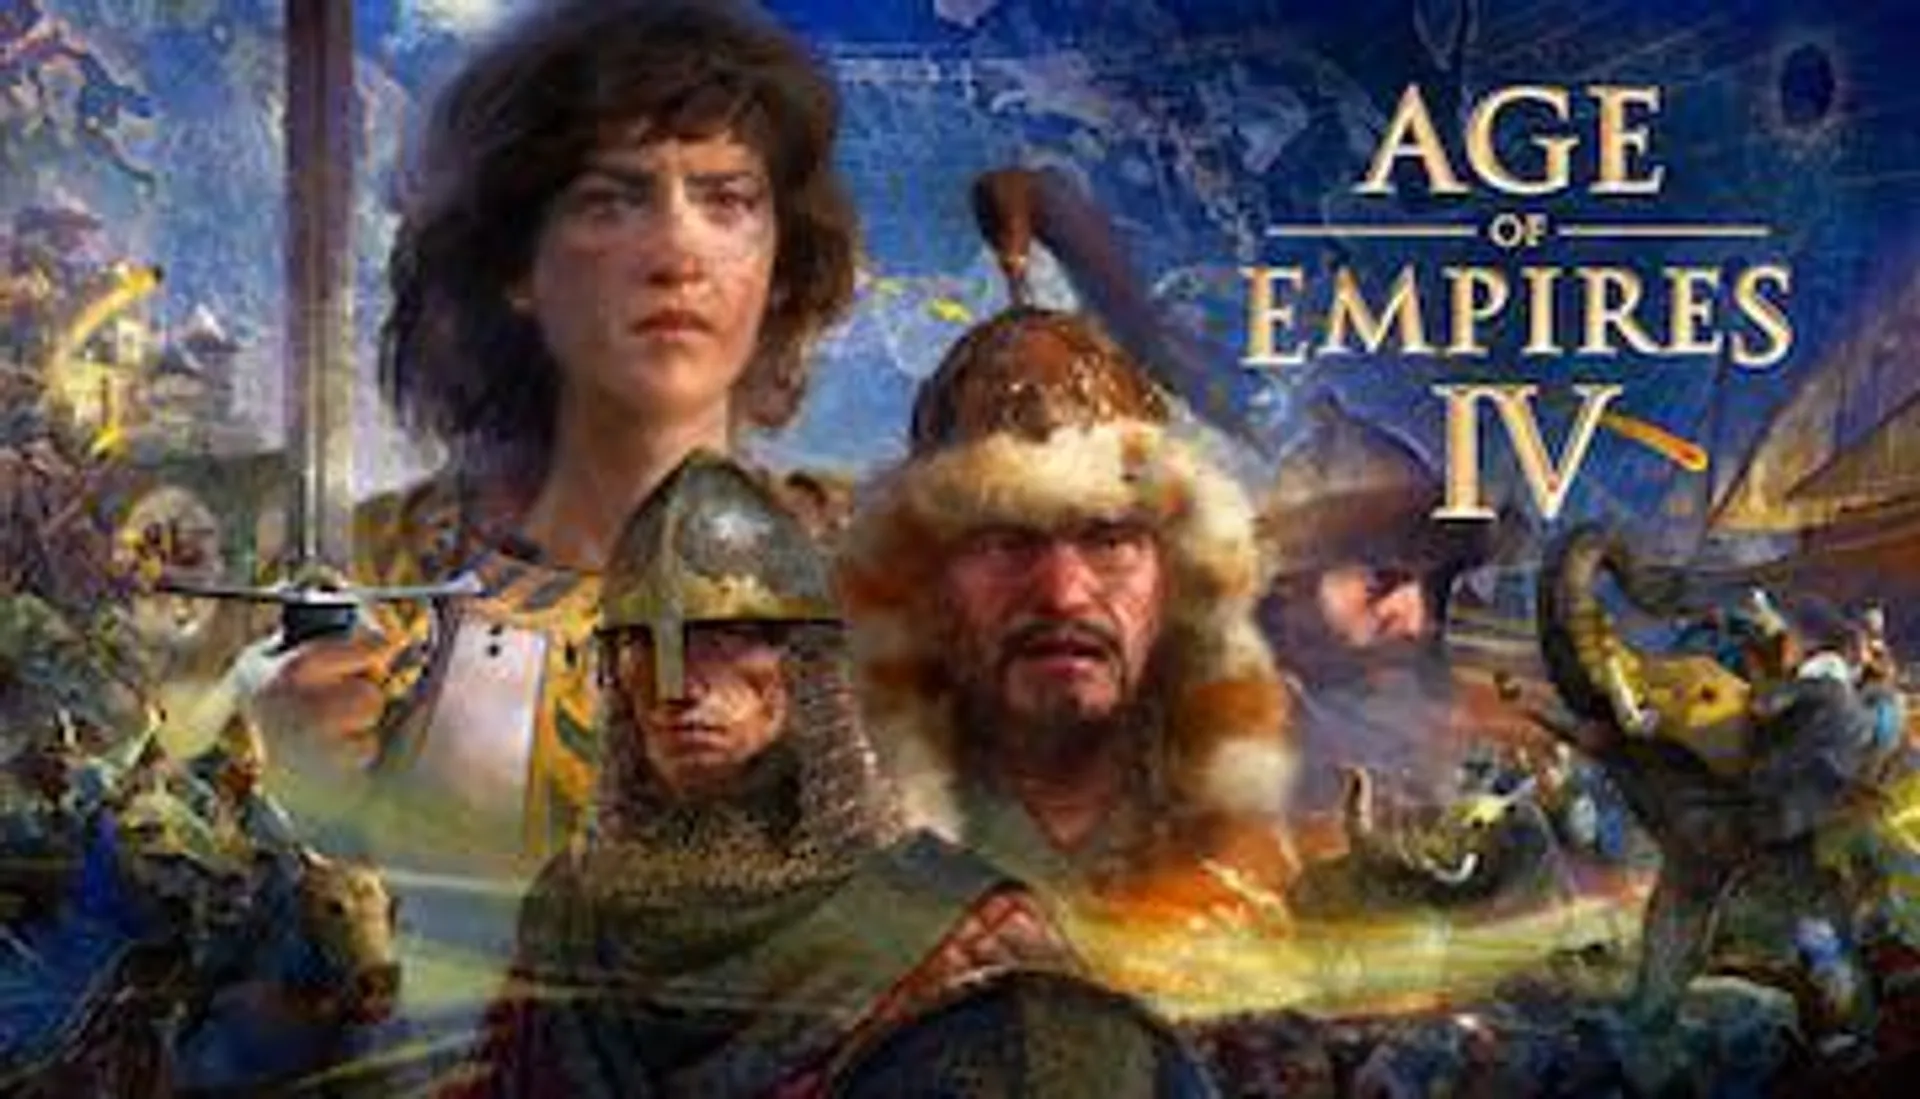 Age of Empires IV - Digital Deluxe Edition